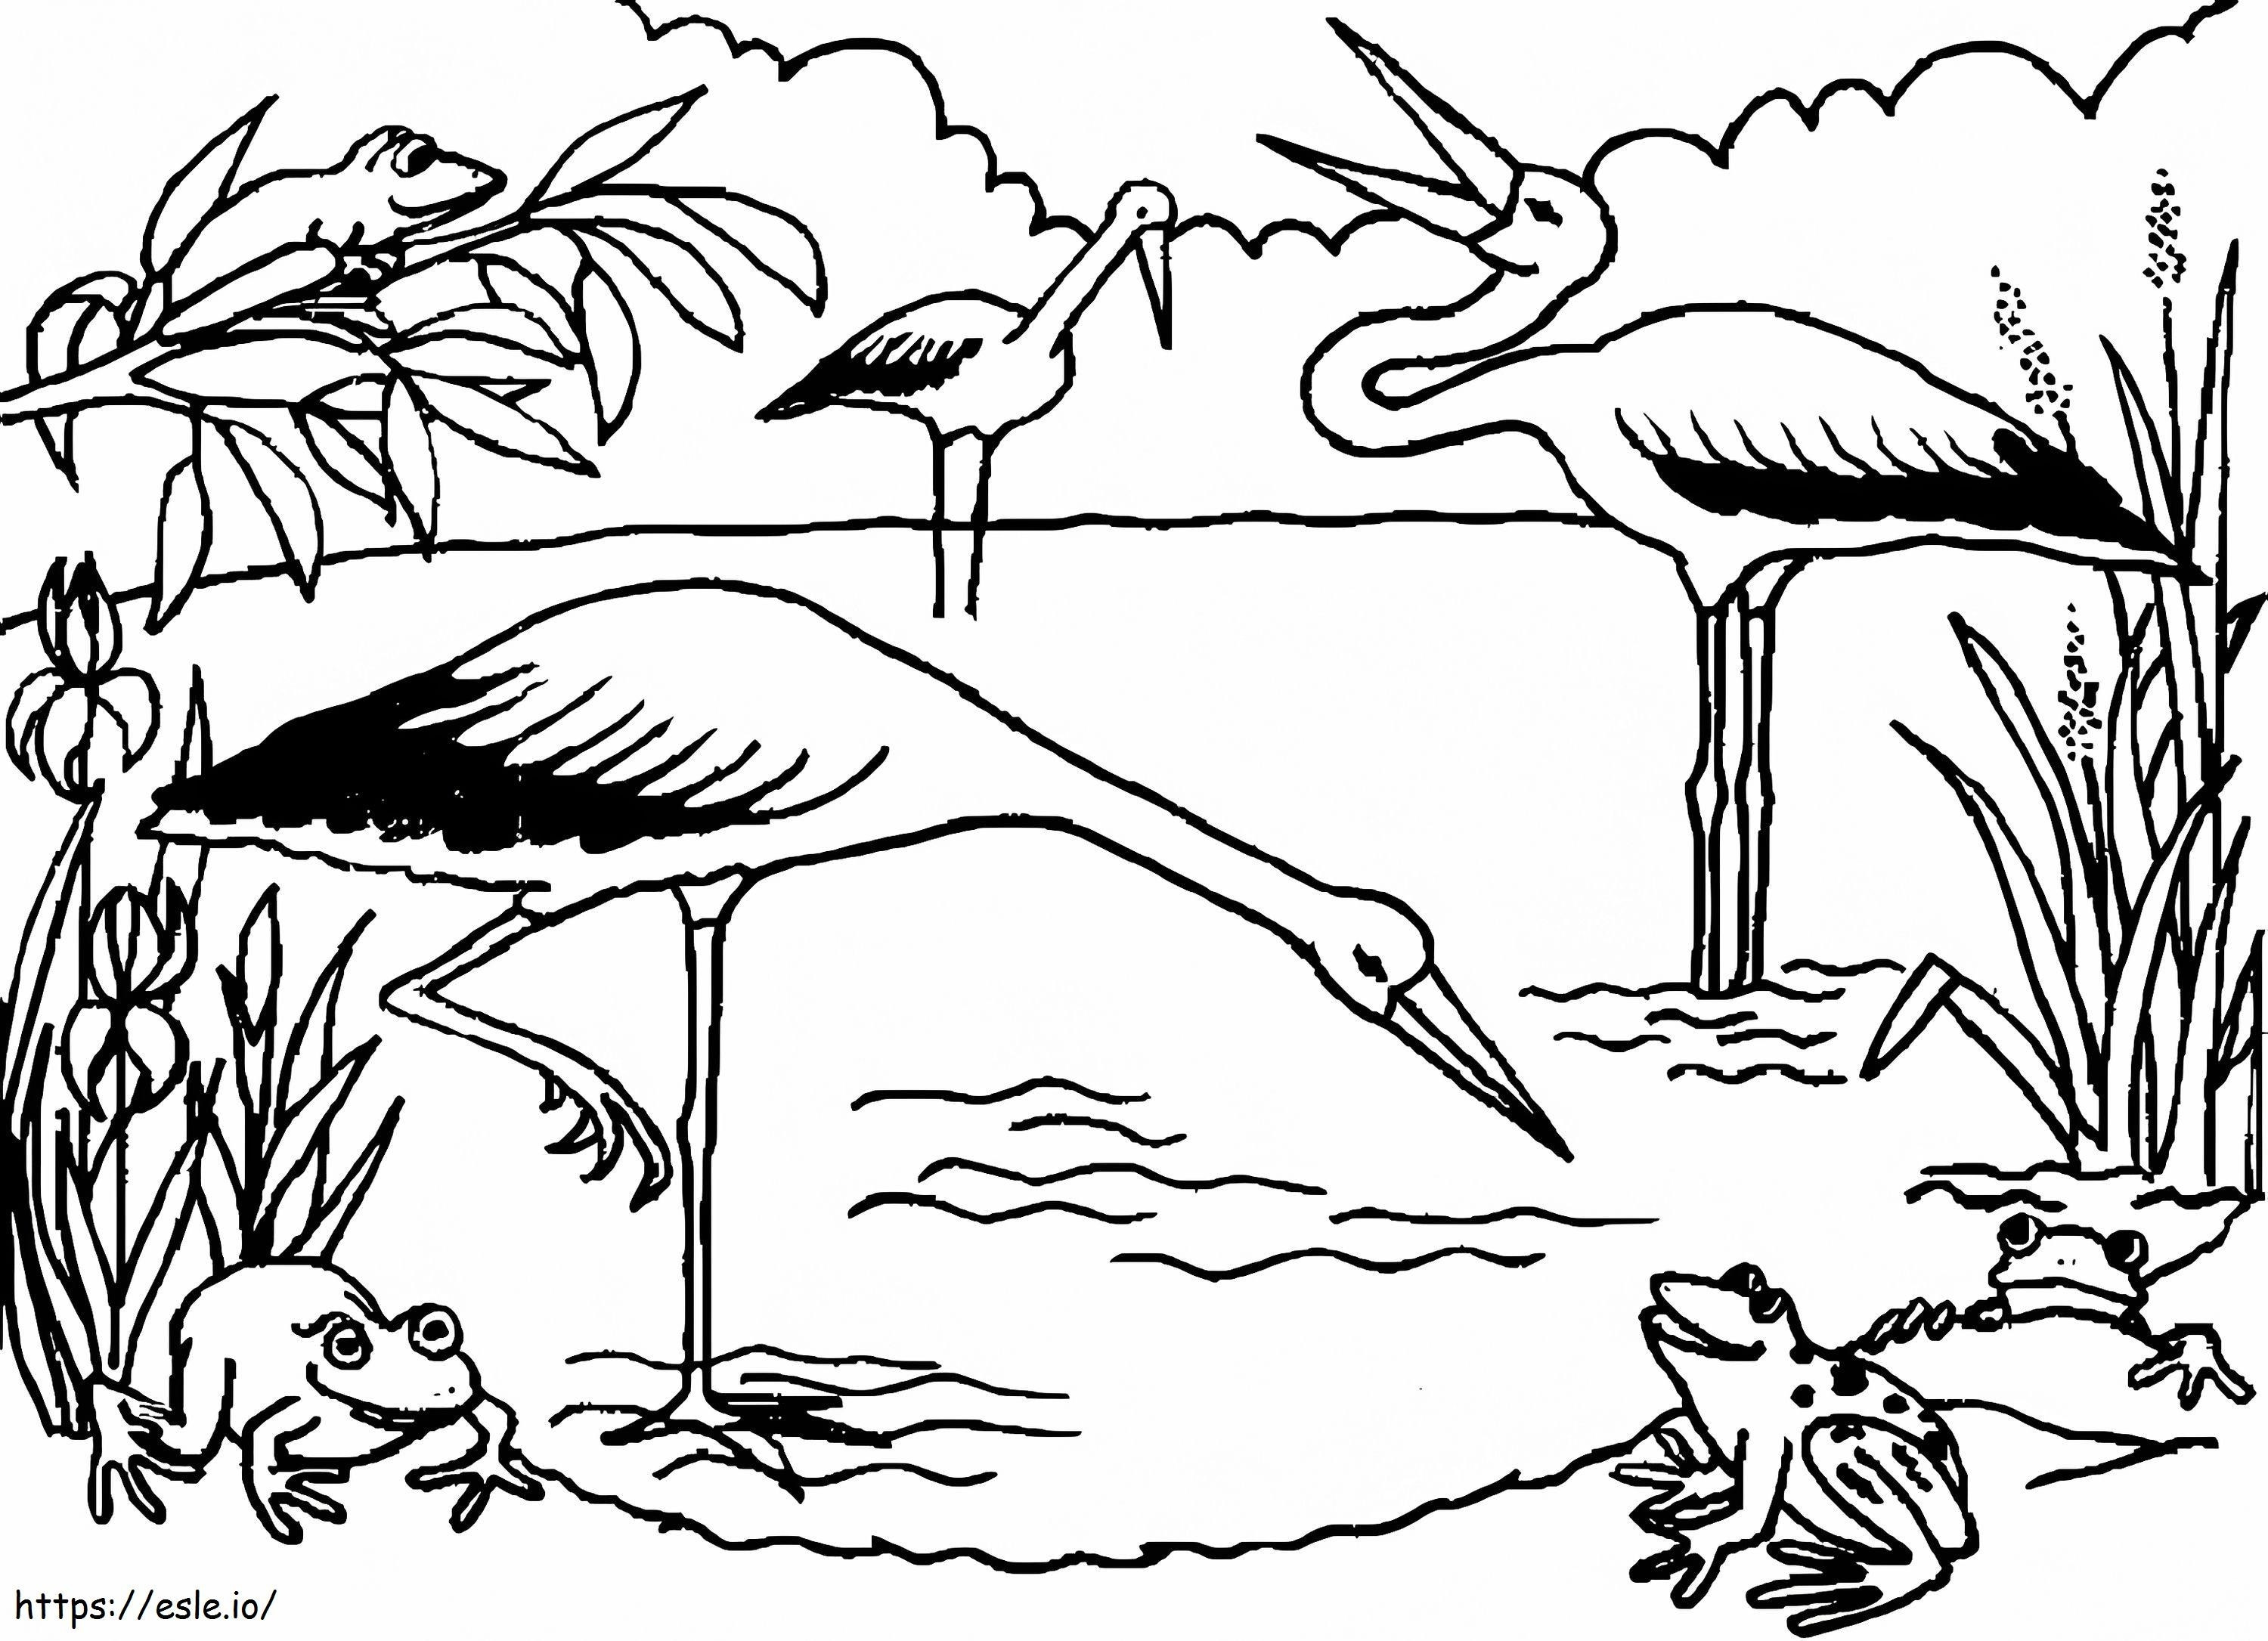 Three Storks coloring page